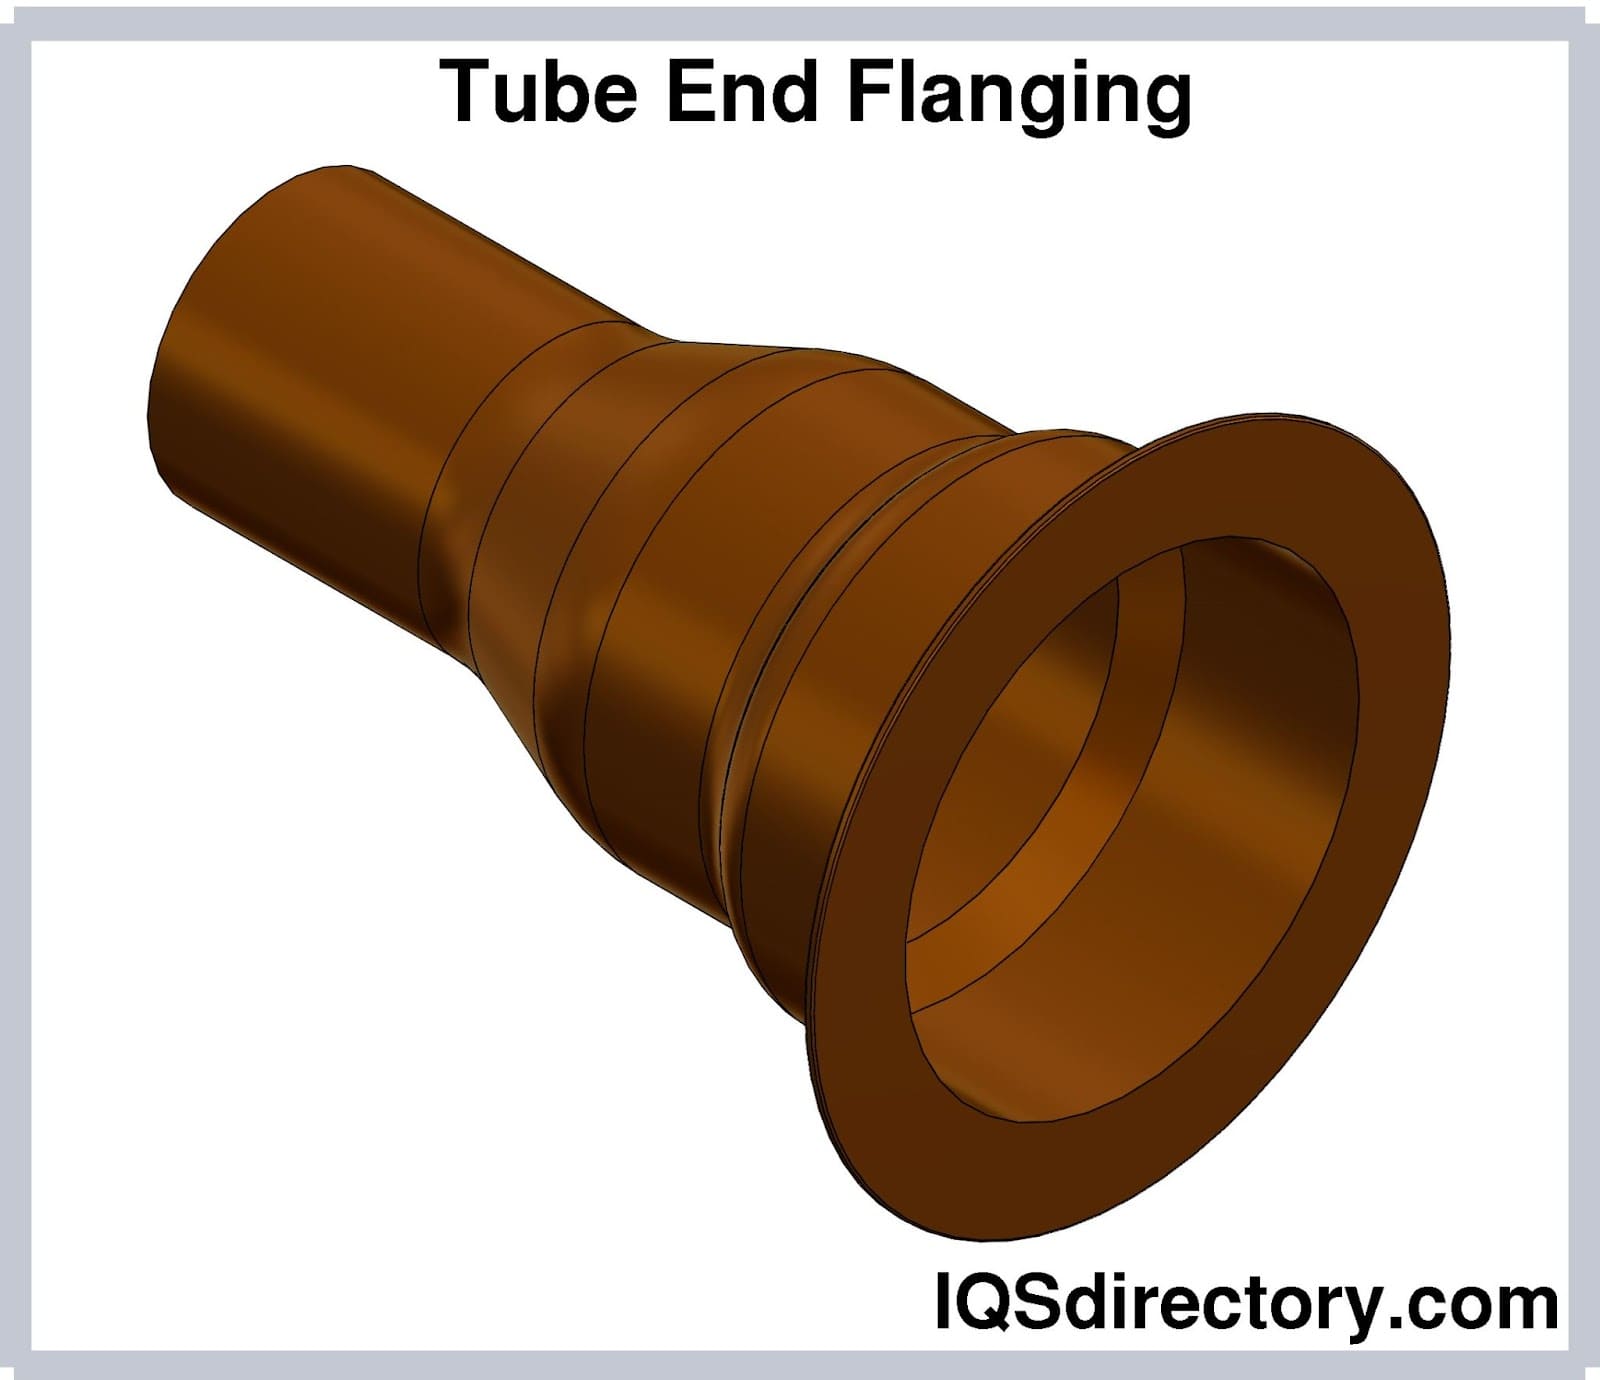 Tube End Flanging